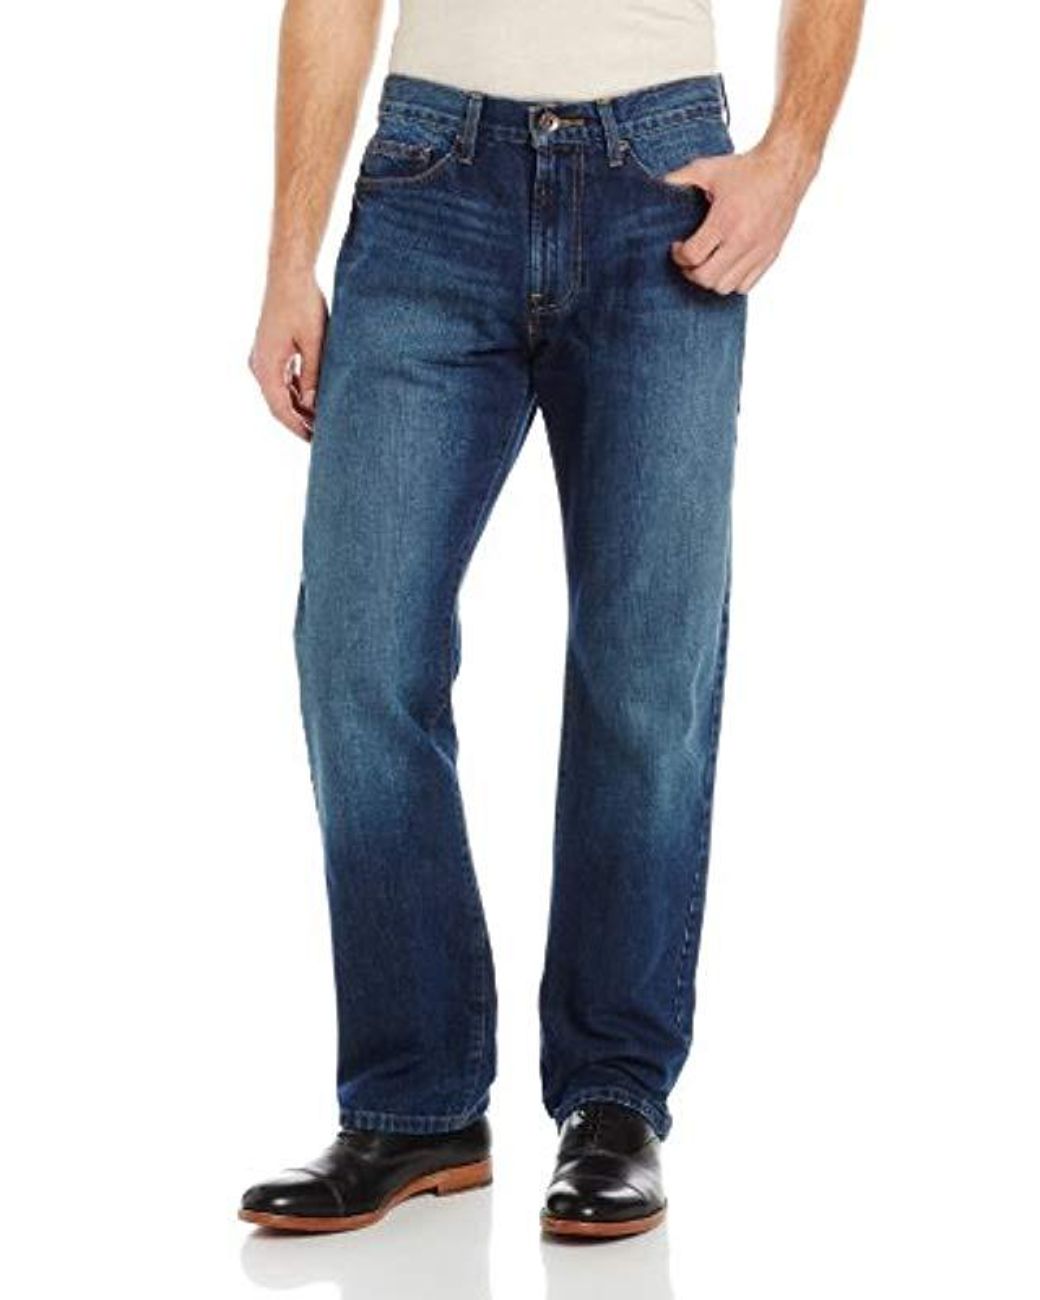 Lyst - Nautica Relaxed Fit Jeans in Blue for Men - Save 16%